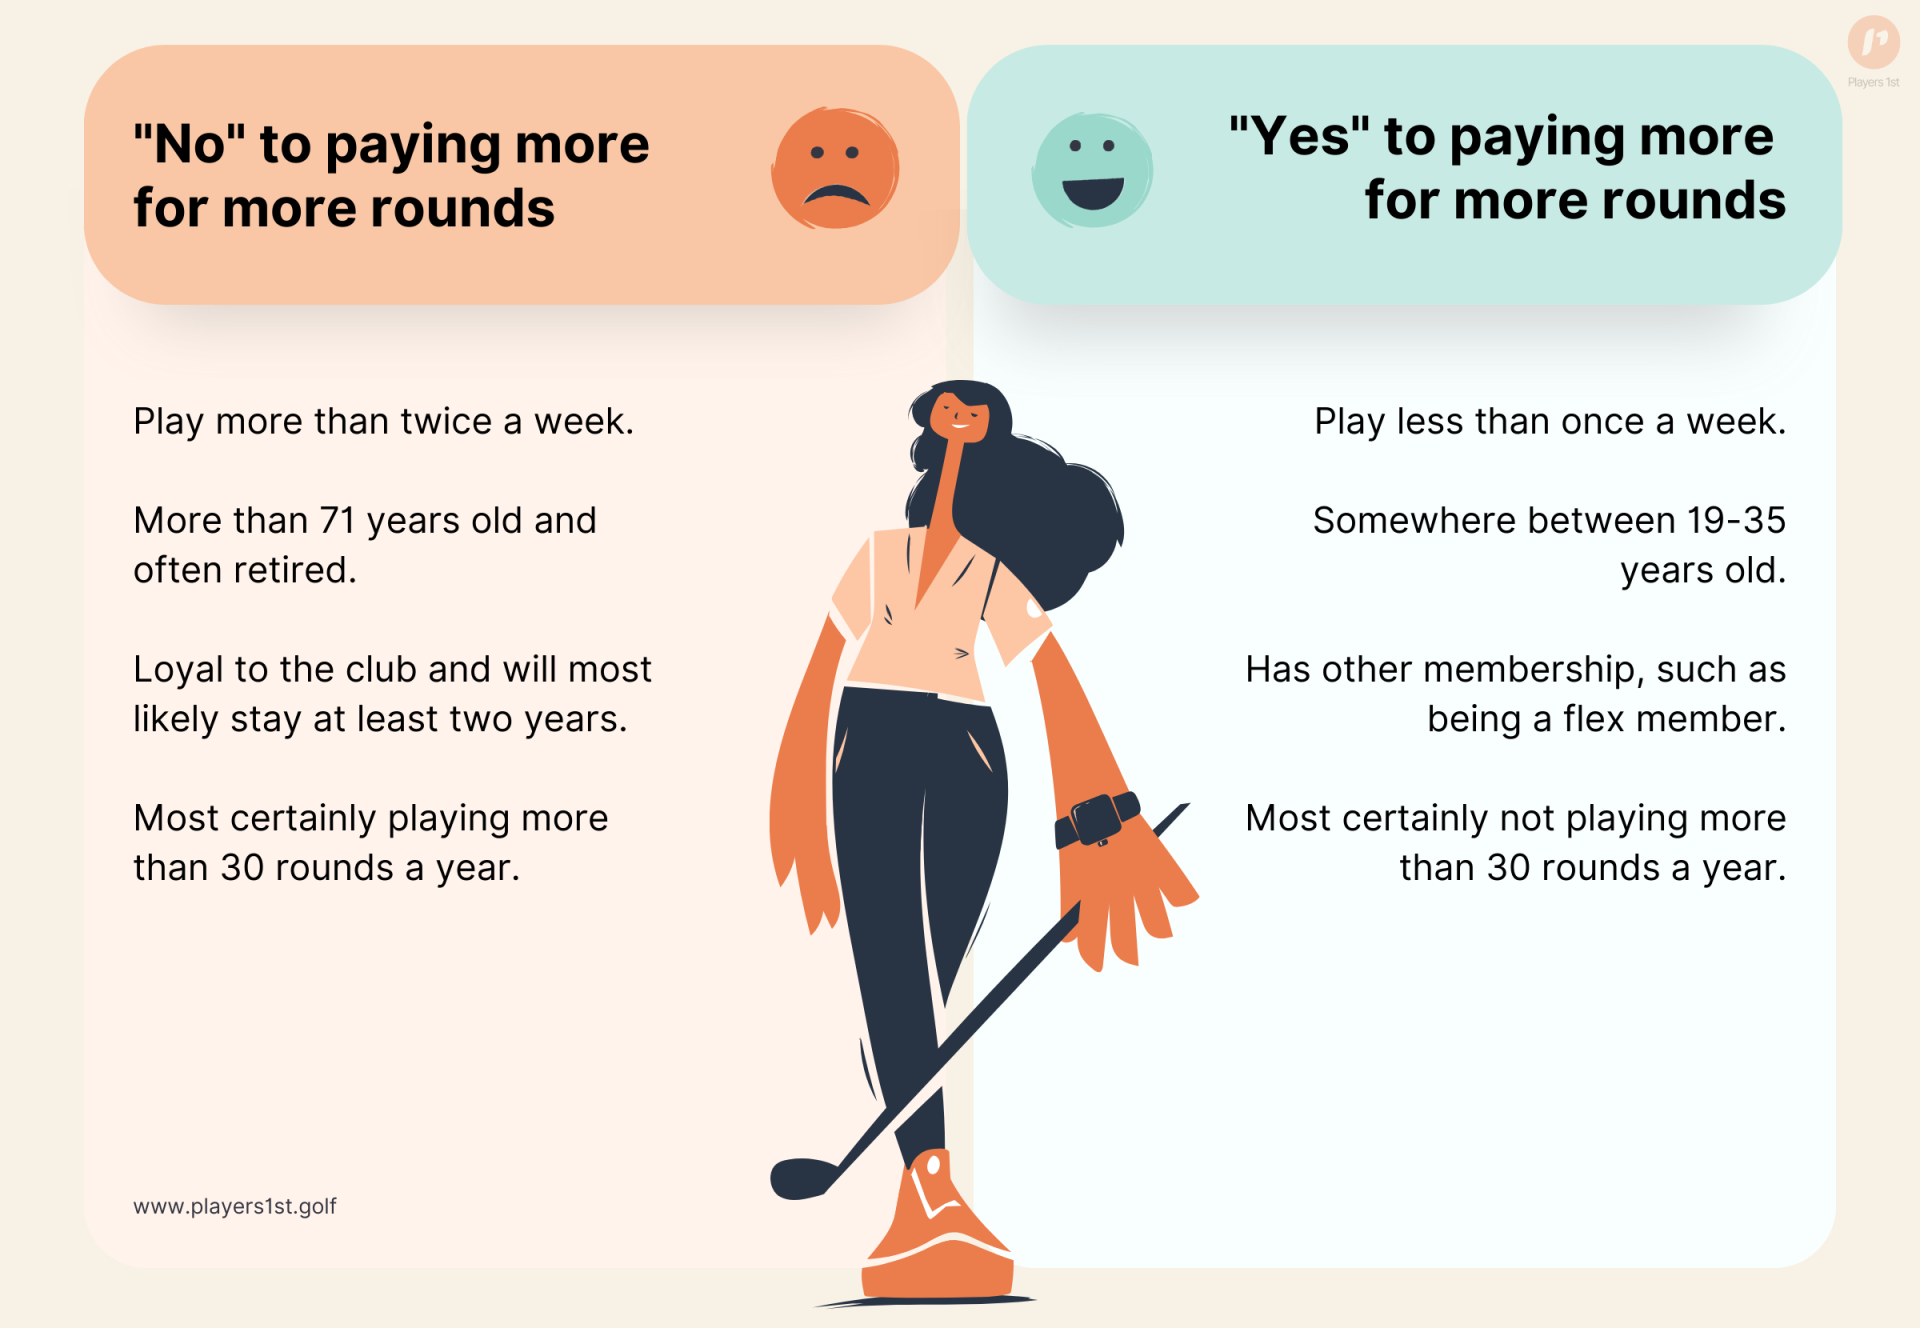 Figure 2: Who totally or partly agrees/disagrees that it's reasonable if the fifth of the members who play more than 30 rounds a year pay a higher membership fee.